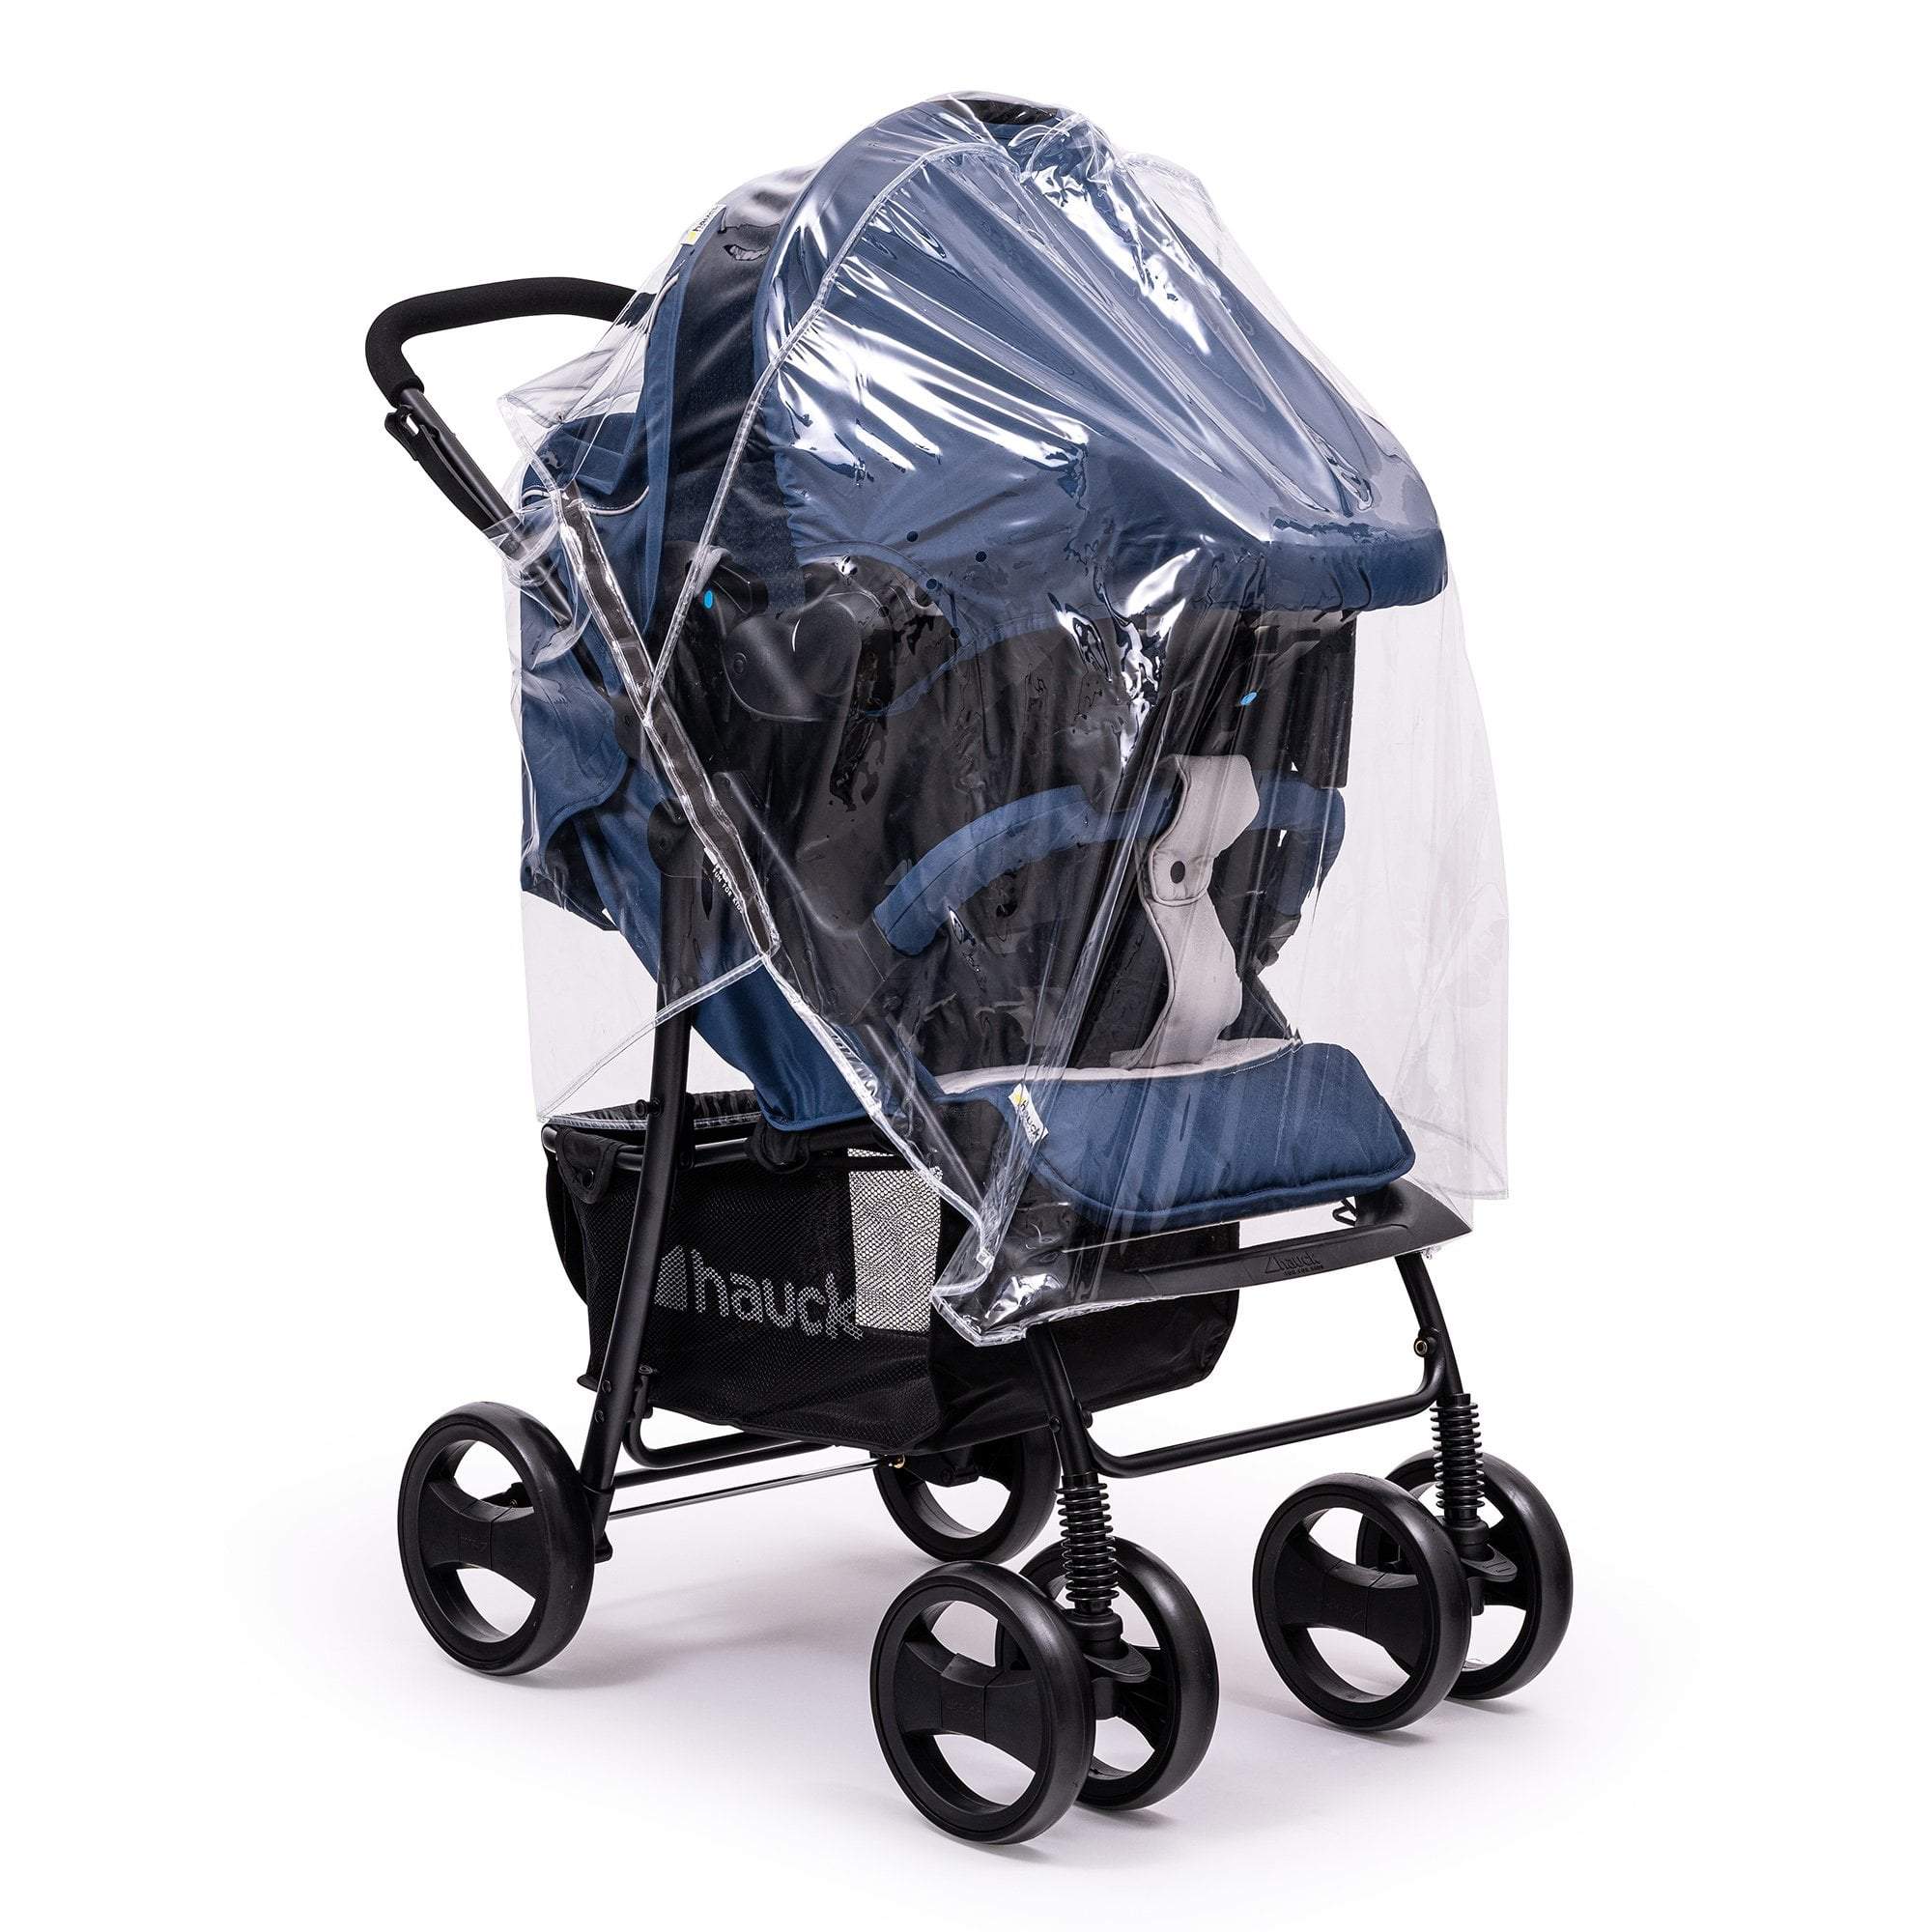 Travel System Raincover Compatible with Greentom - Fits All Models - For Your Little One